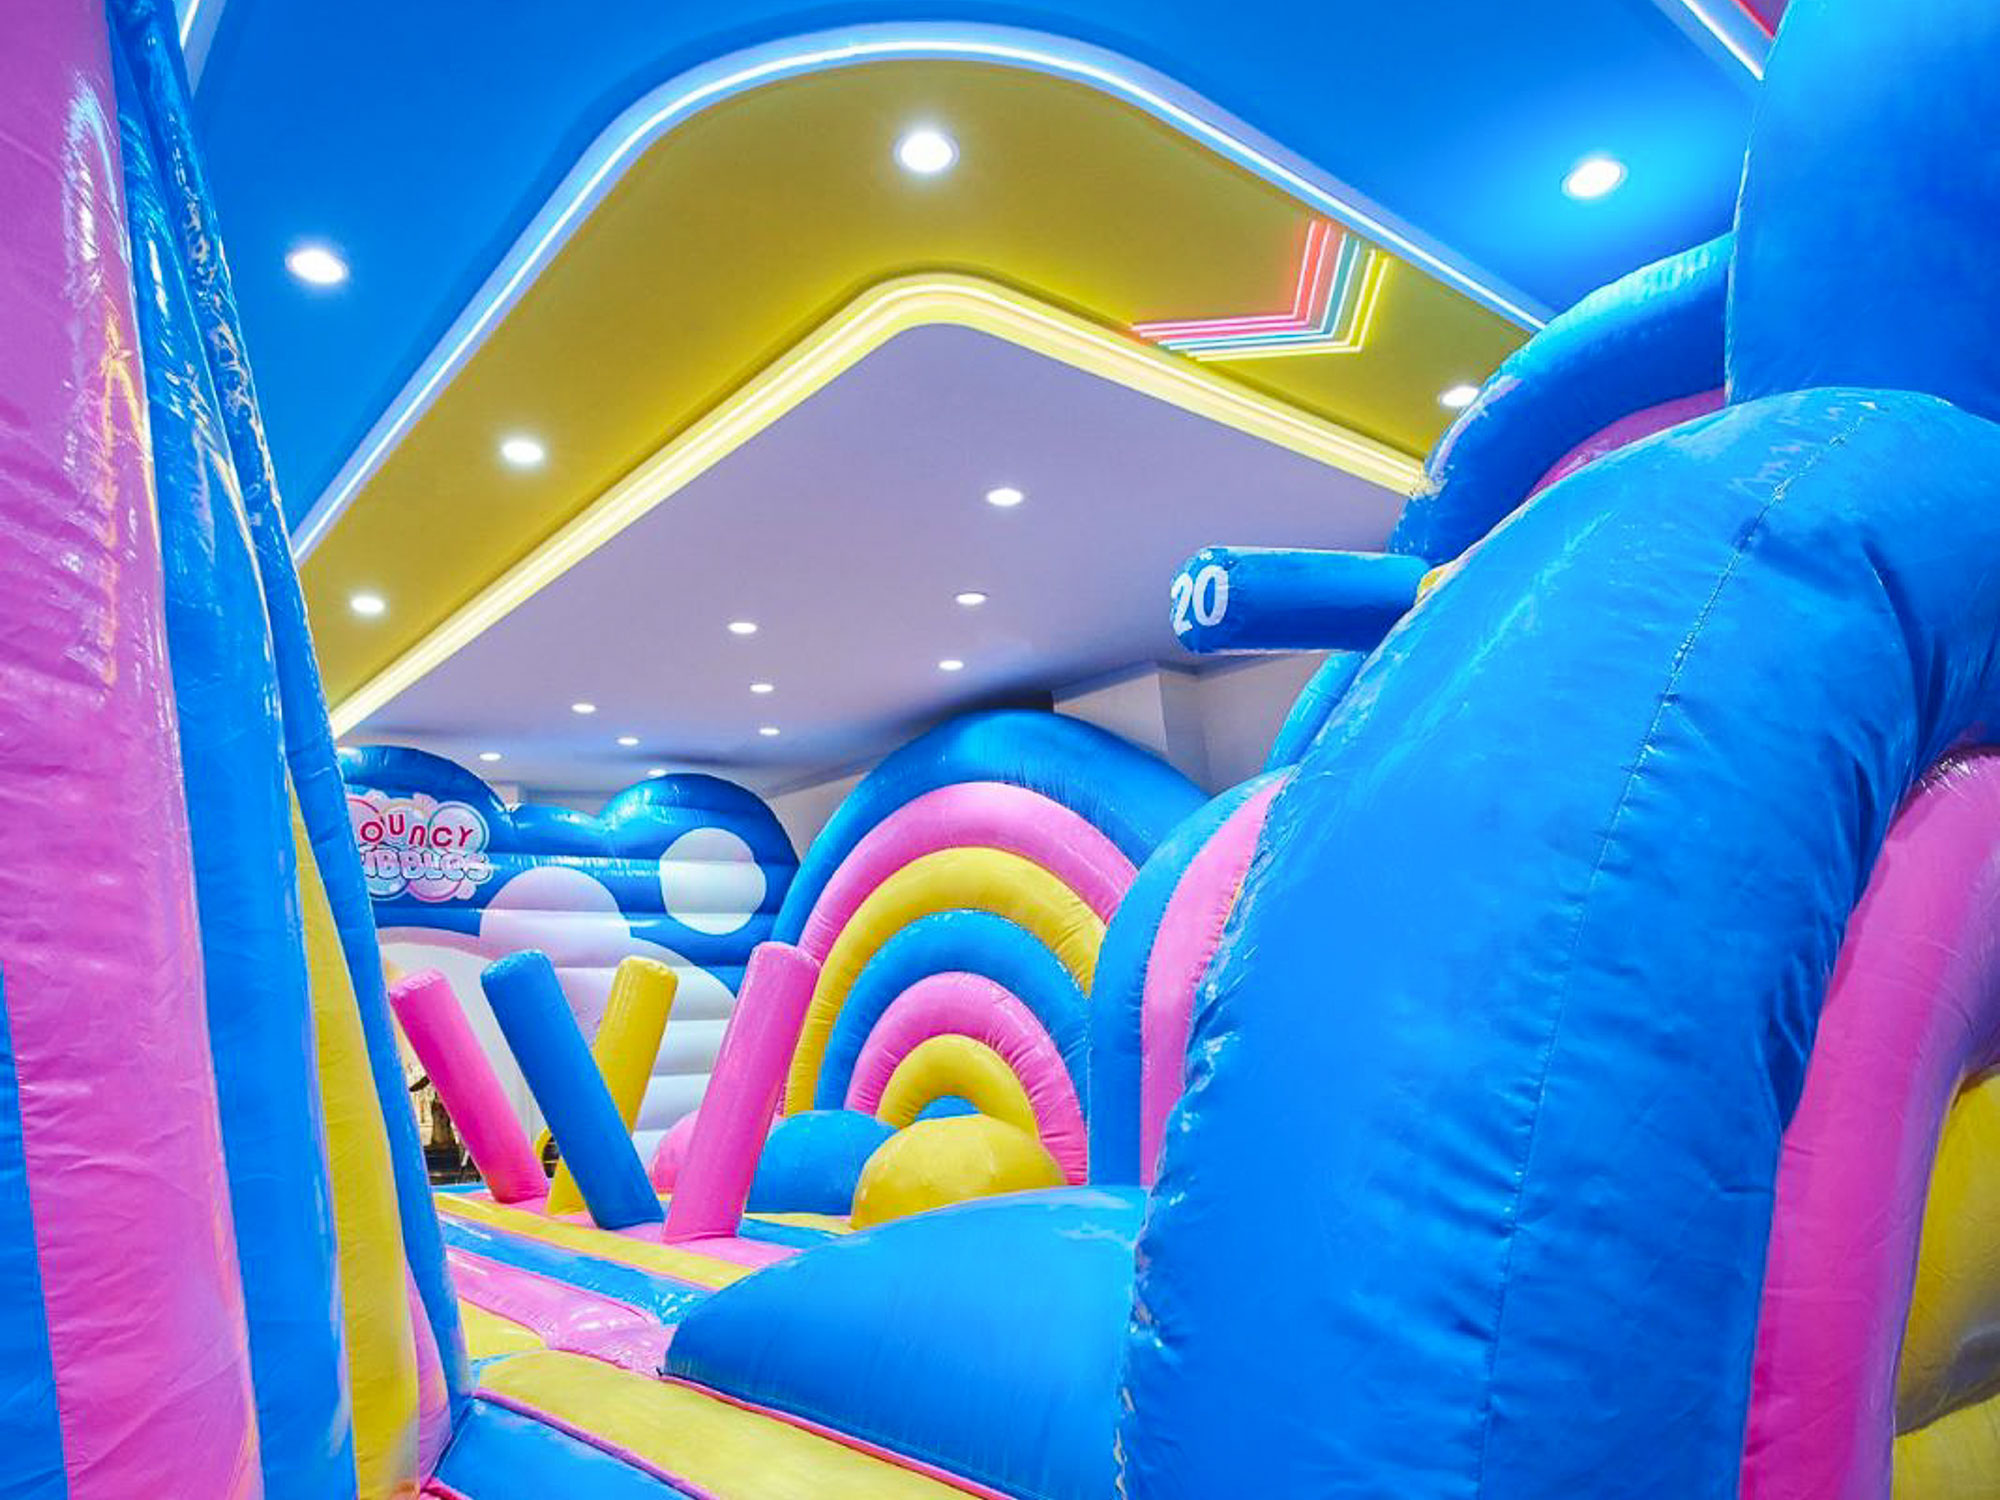 The design of the inflatable maintained a strong brand identity, consistent with the décor of the space and Bouncy Bubbles brand identity.  